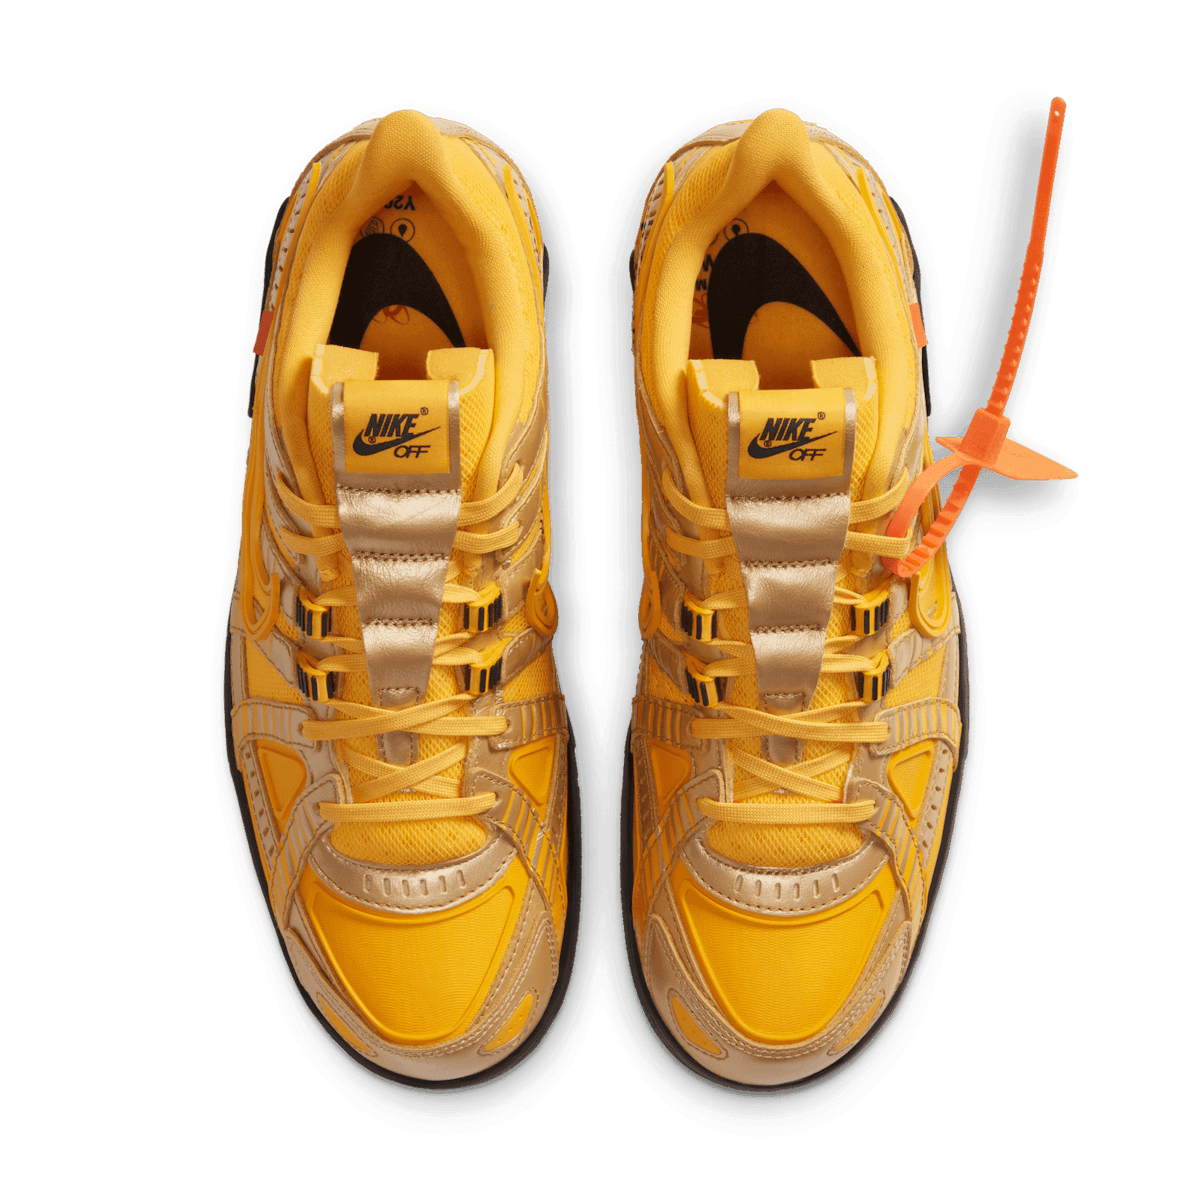 Nike Air Rubber Dunk Off-White University Gold Angle 1